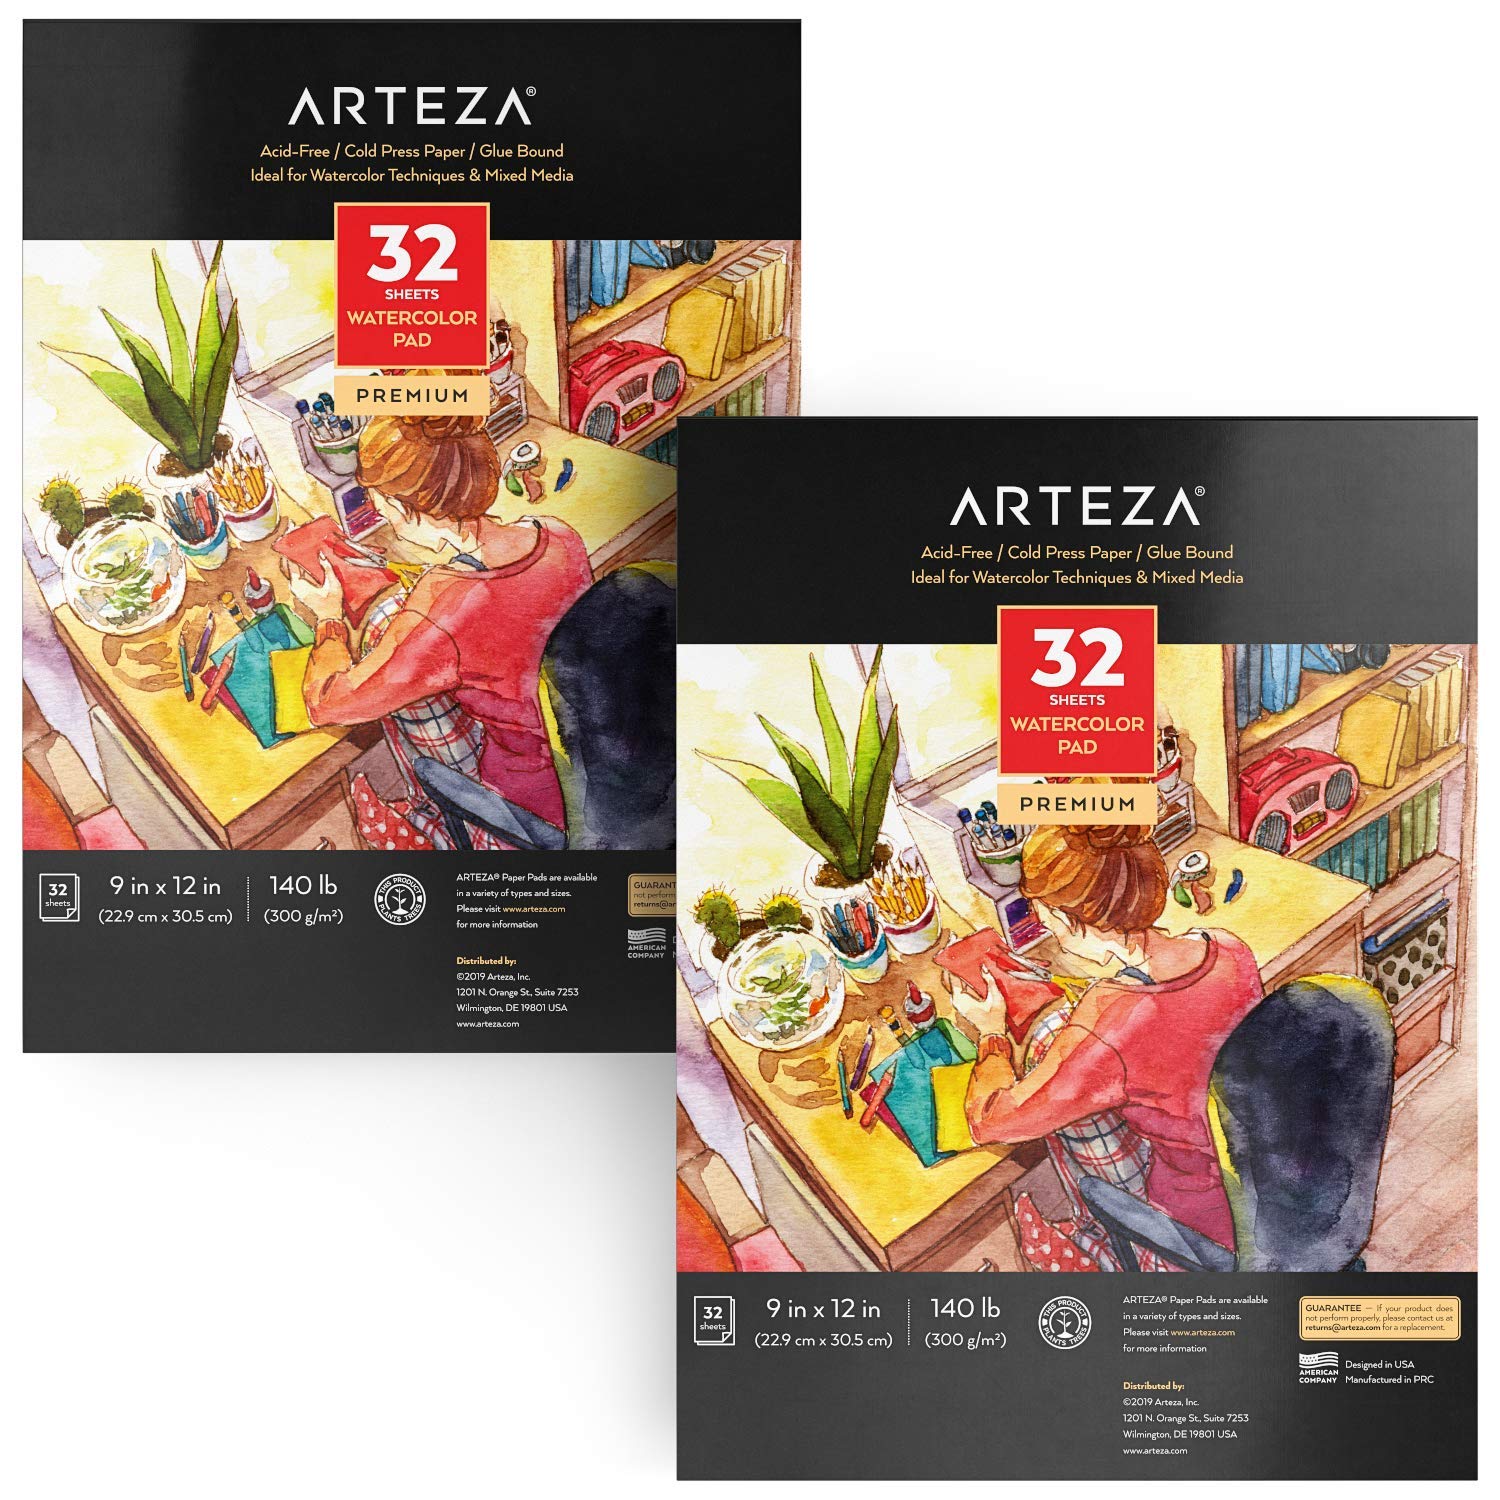 Arteza Watercolor Paper 9x12 Inch, Pack of 2, 64 Sheets (140lb/300gsm), Cold Pressed Art Sketchbook Pad, Art Supplies for Painting & Drawing, Wet, Mixed Media